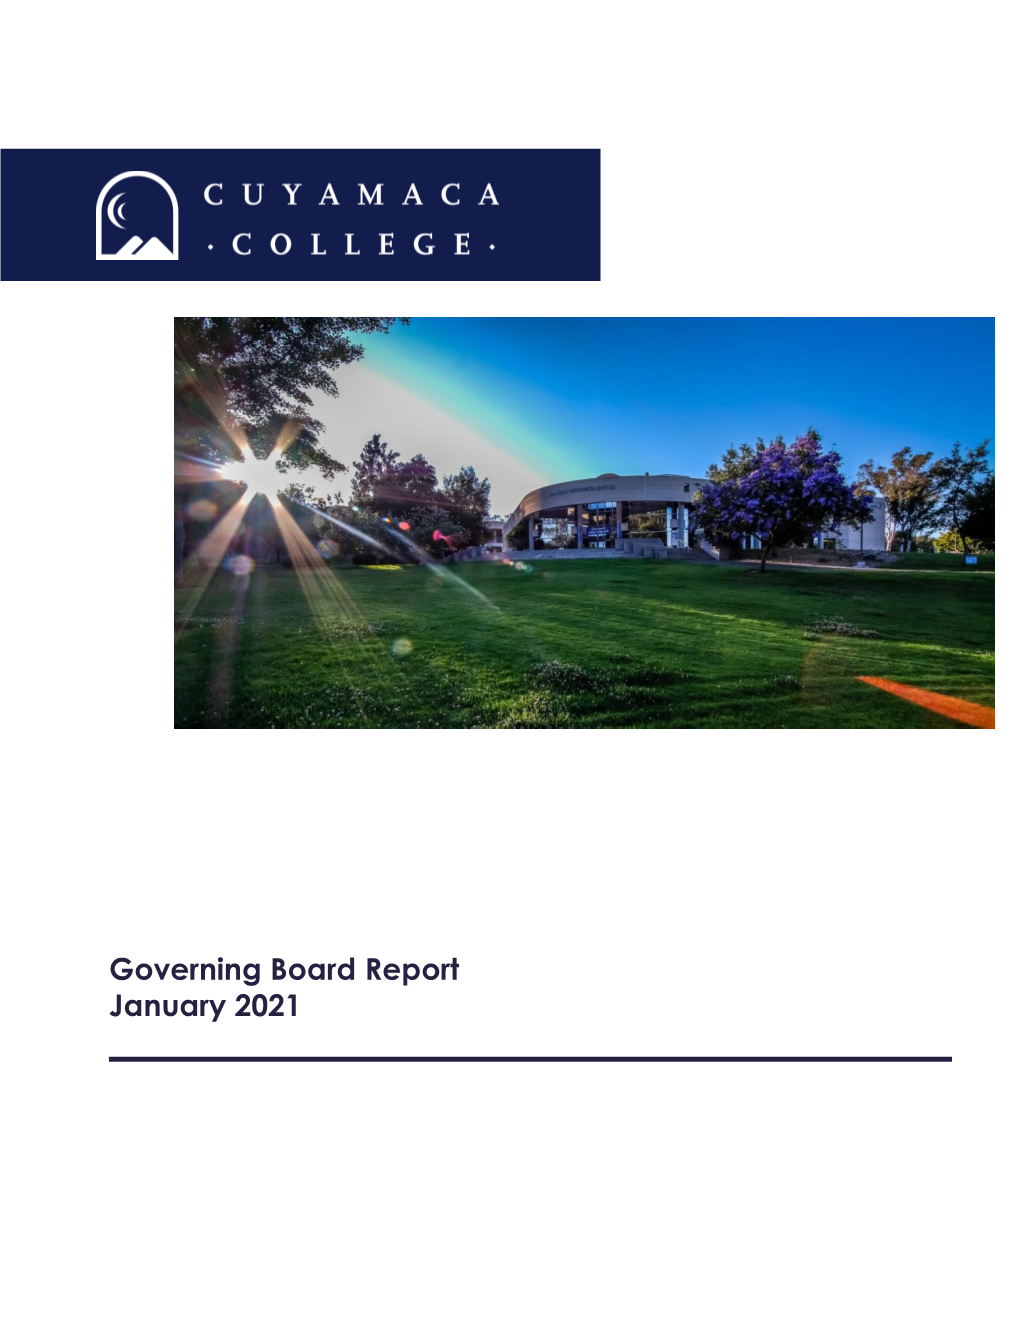 Governing Board Report January 2021